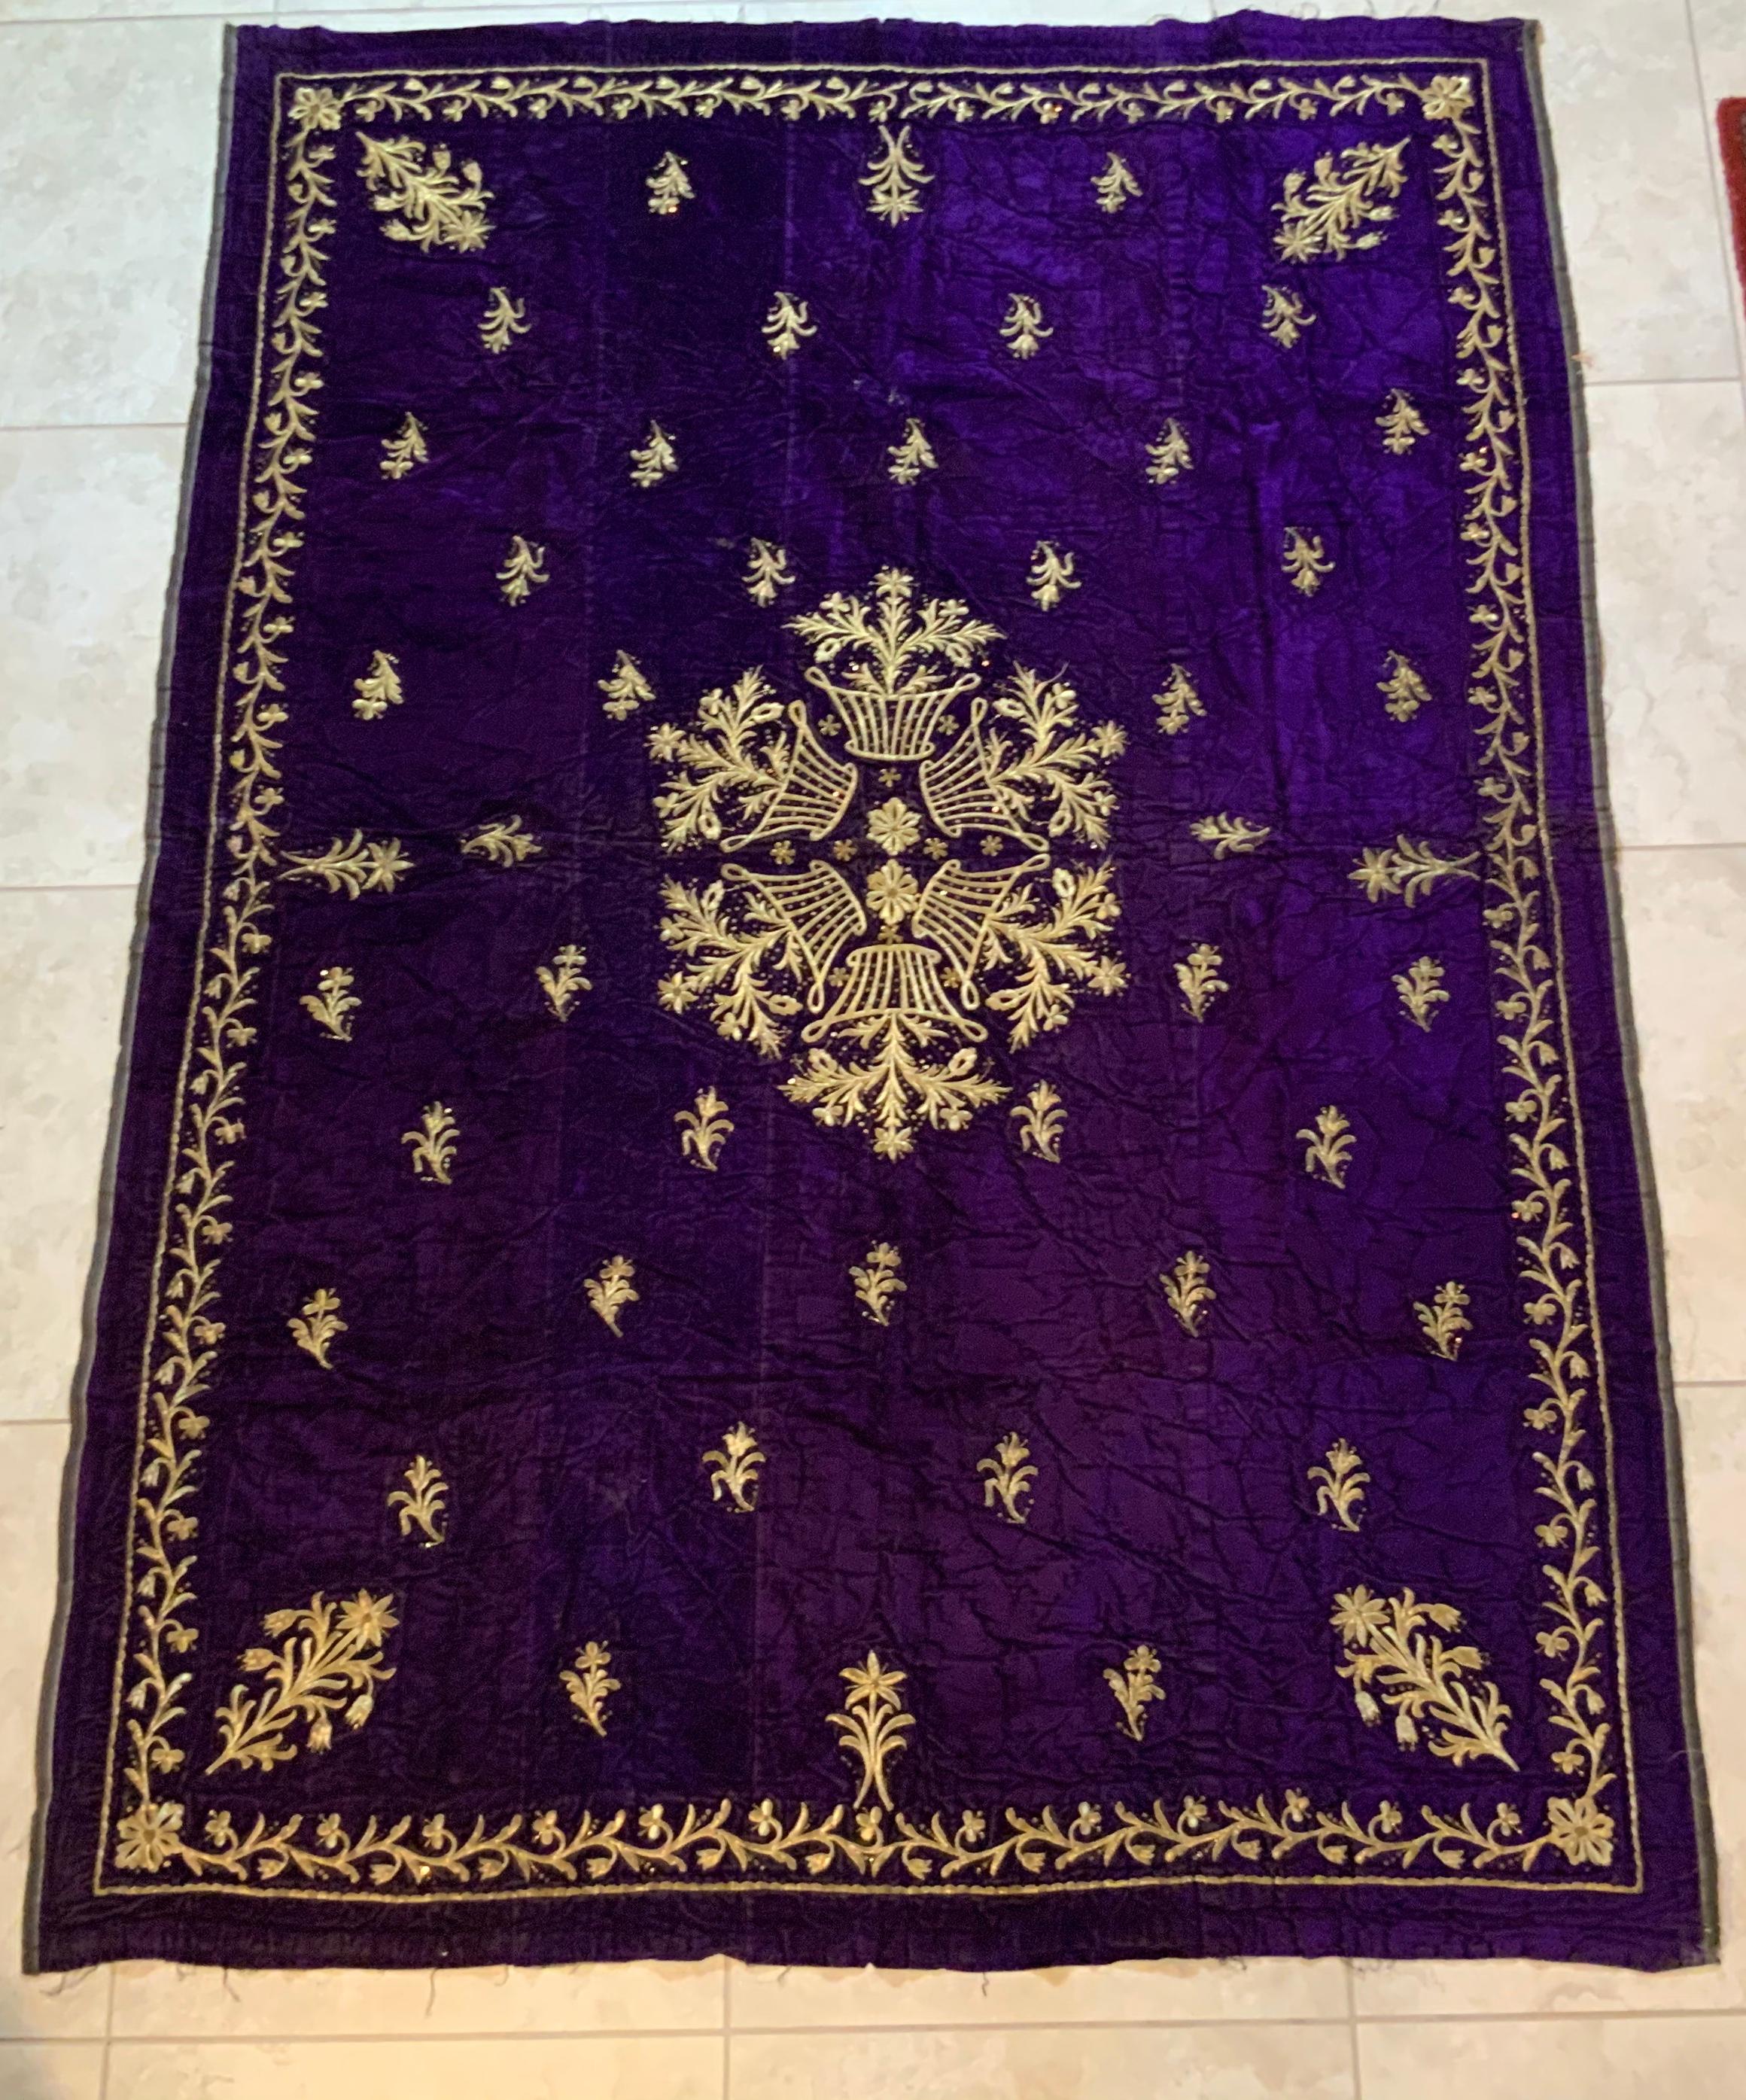 Embroidered Antique Velvet and Gold Embroidery Textile For Sale